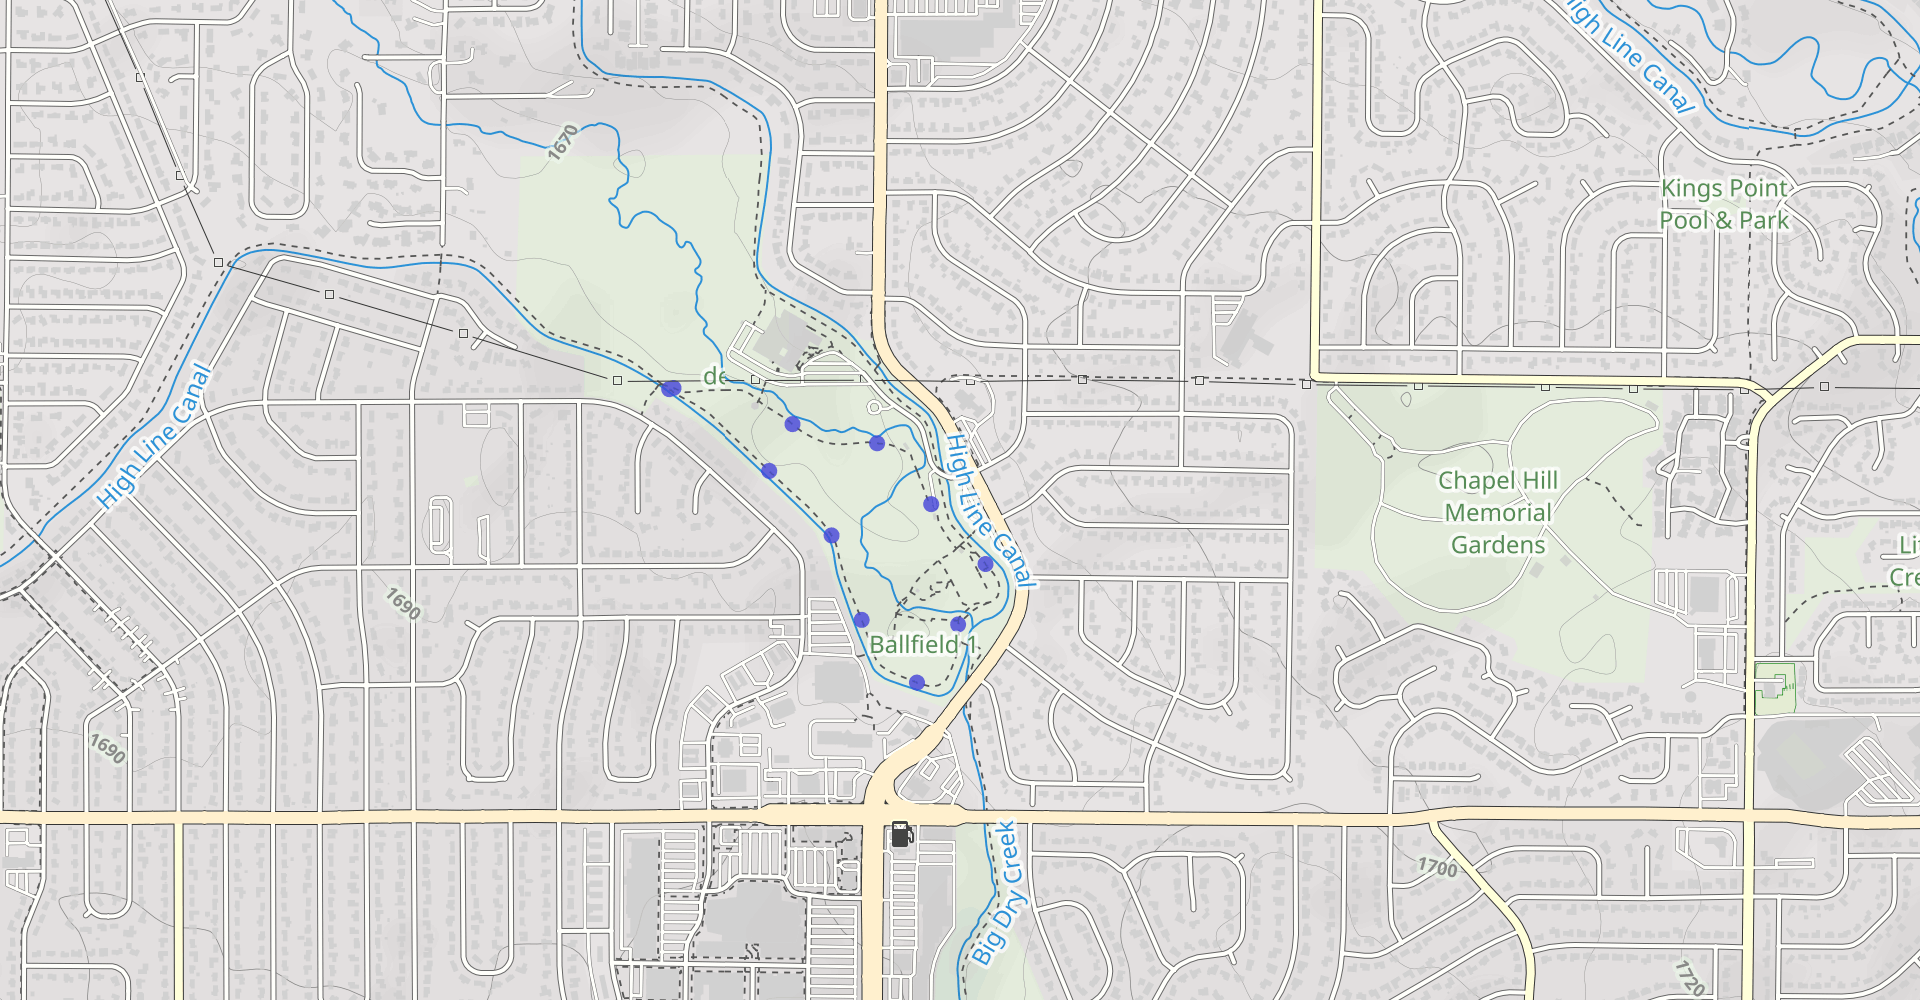 Highline Canal Trail and Centennial Link Trail